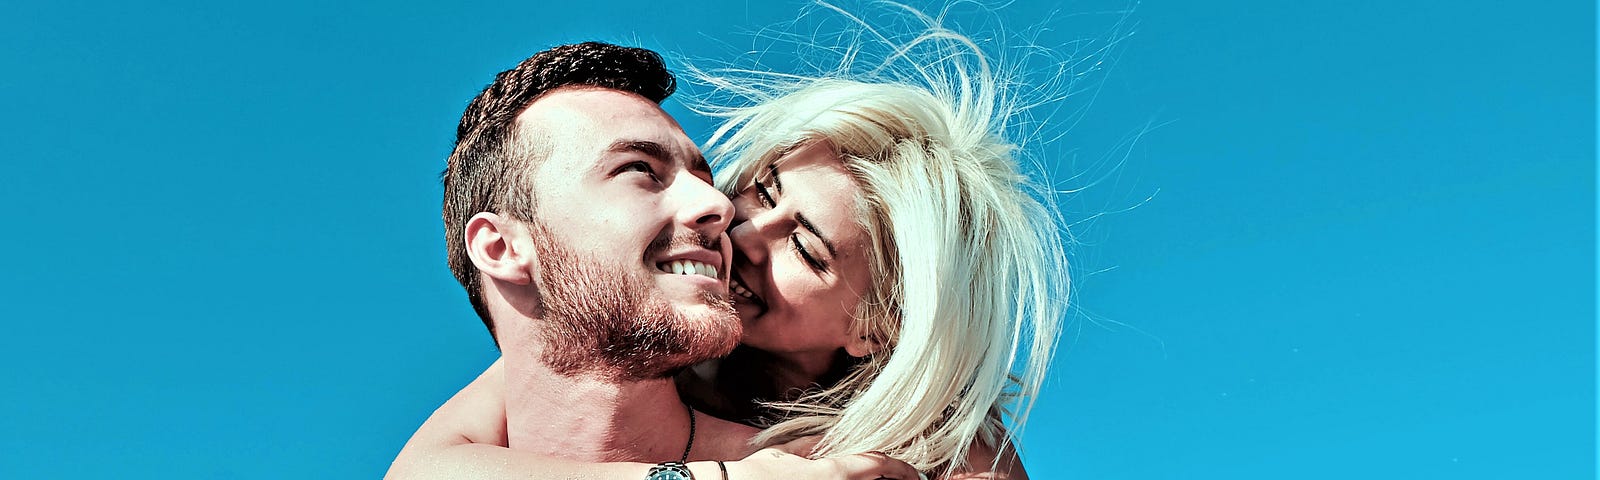 The 8 Stages of Getting Back Together — Make Your Ex Miss You Like Crazy